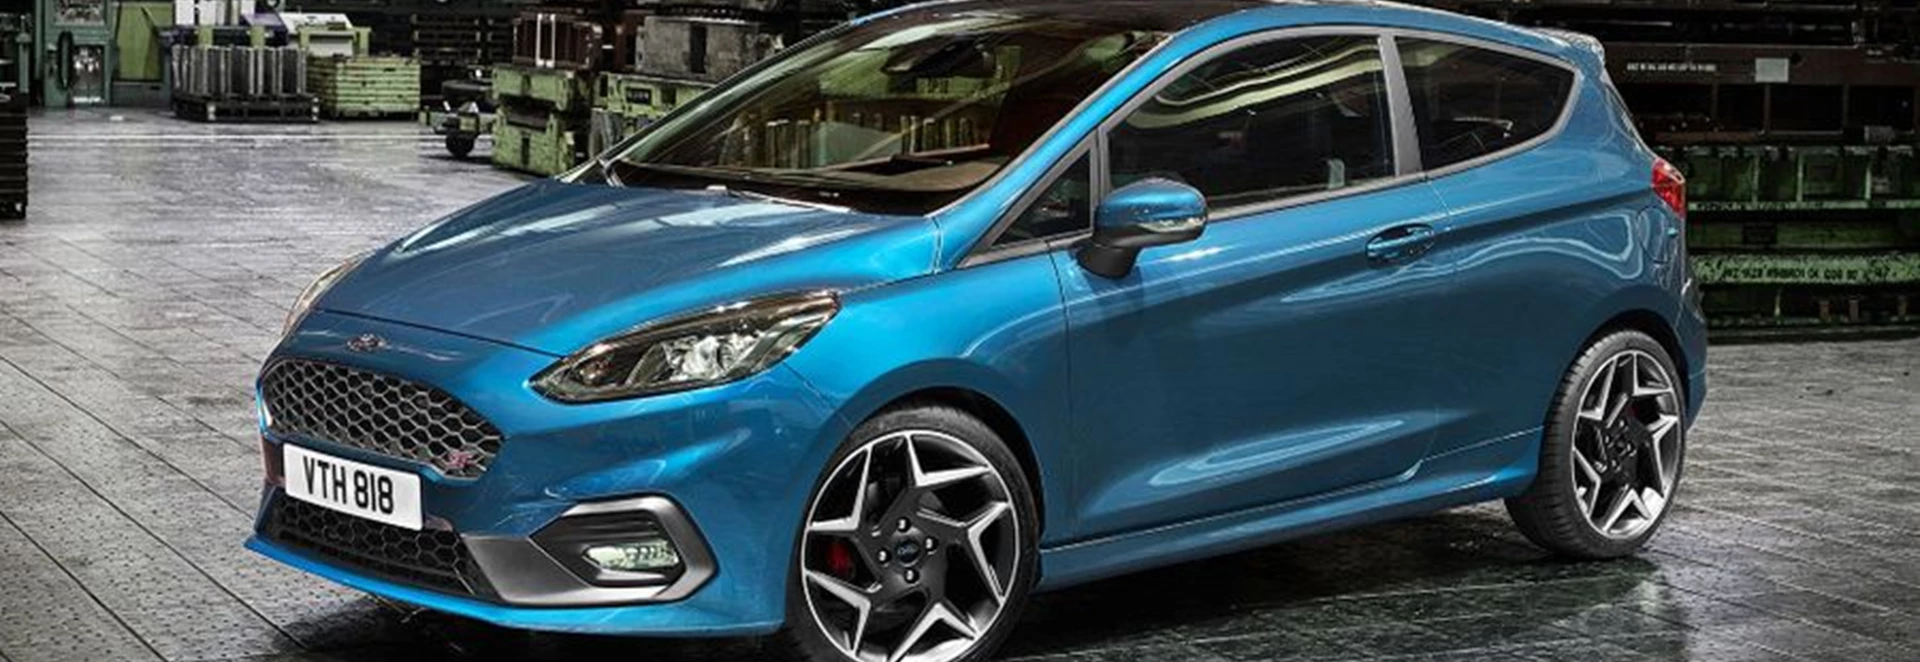 2017 Ford Fiesta ST unveiled, with new engine but not much more power